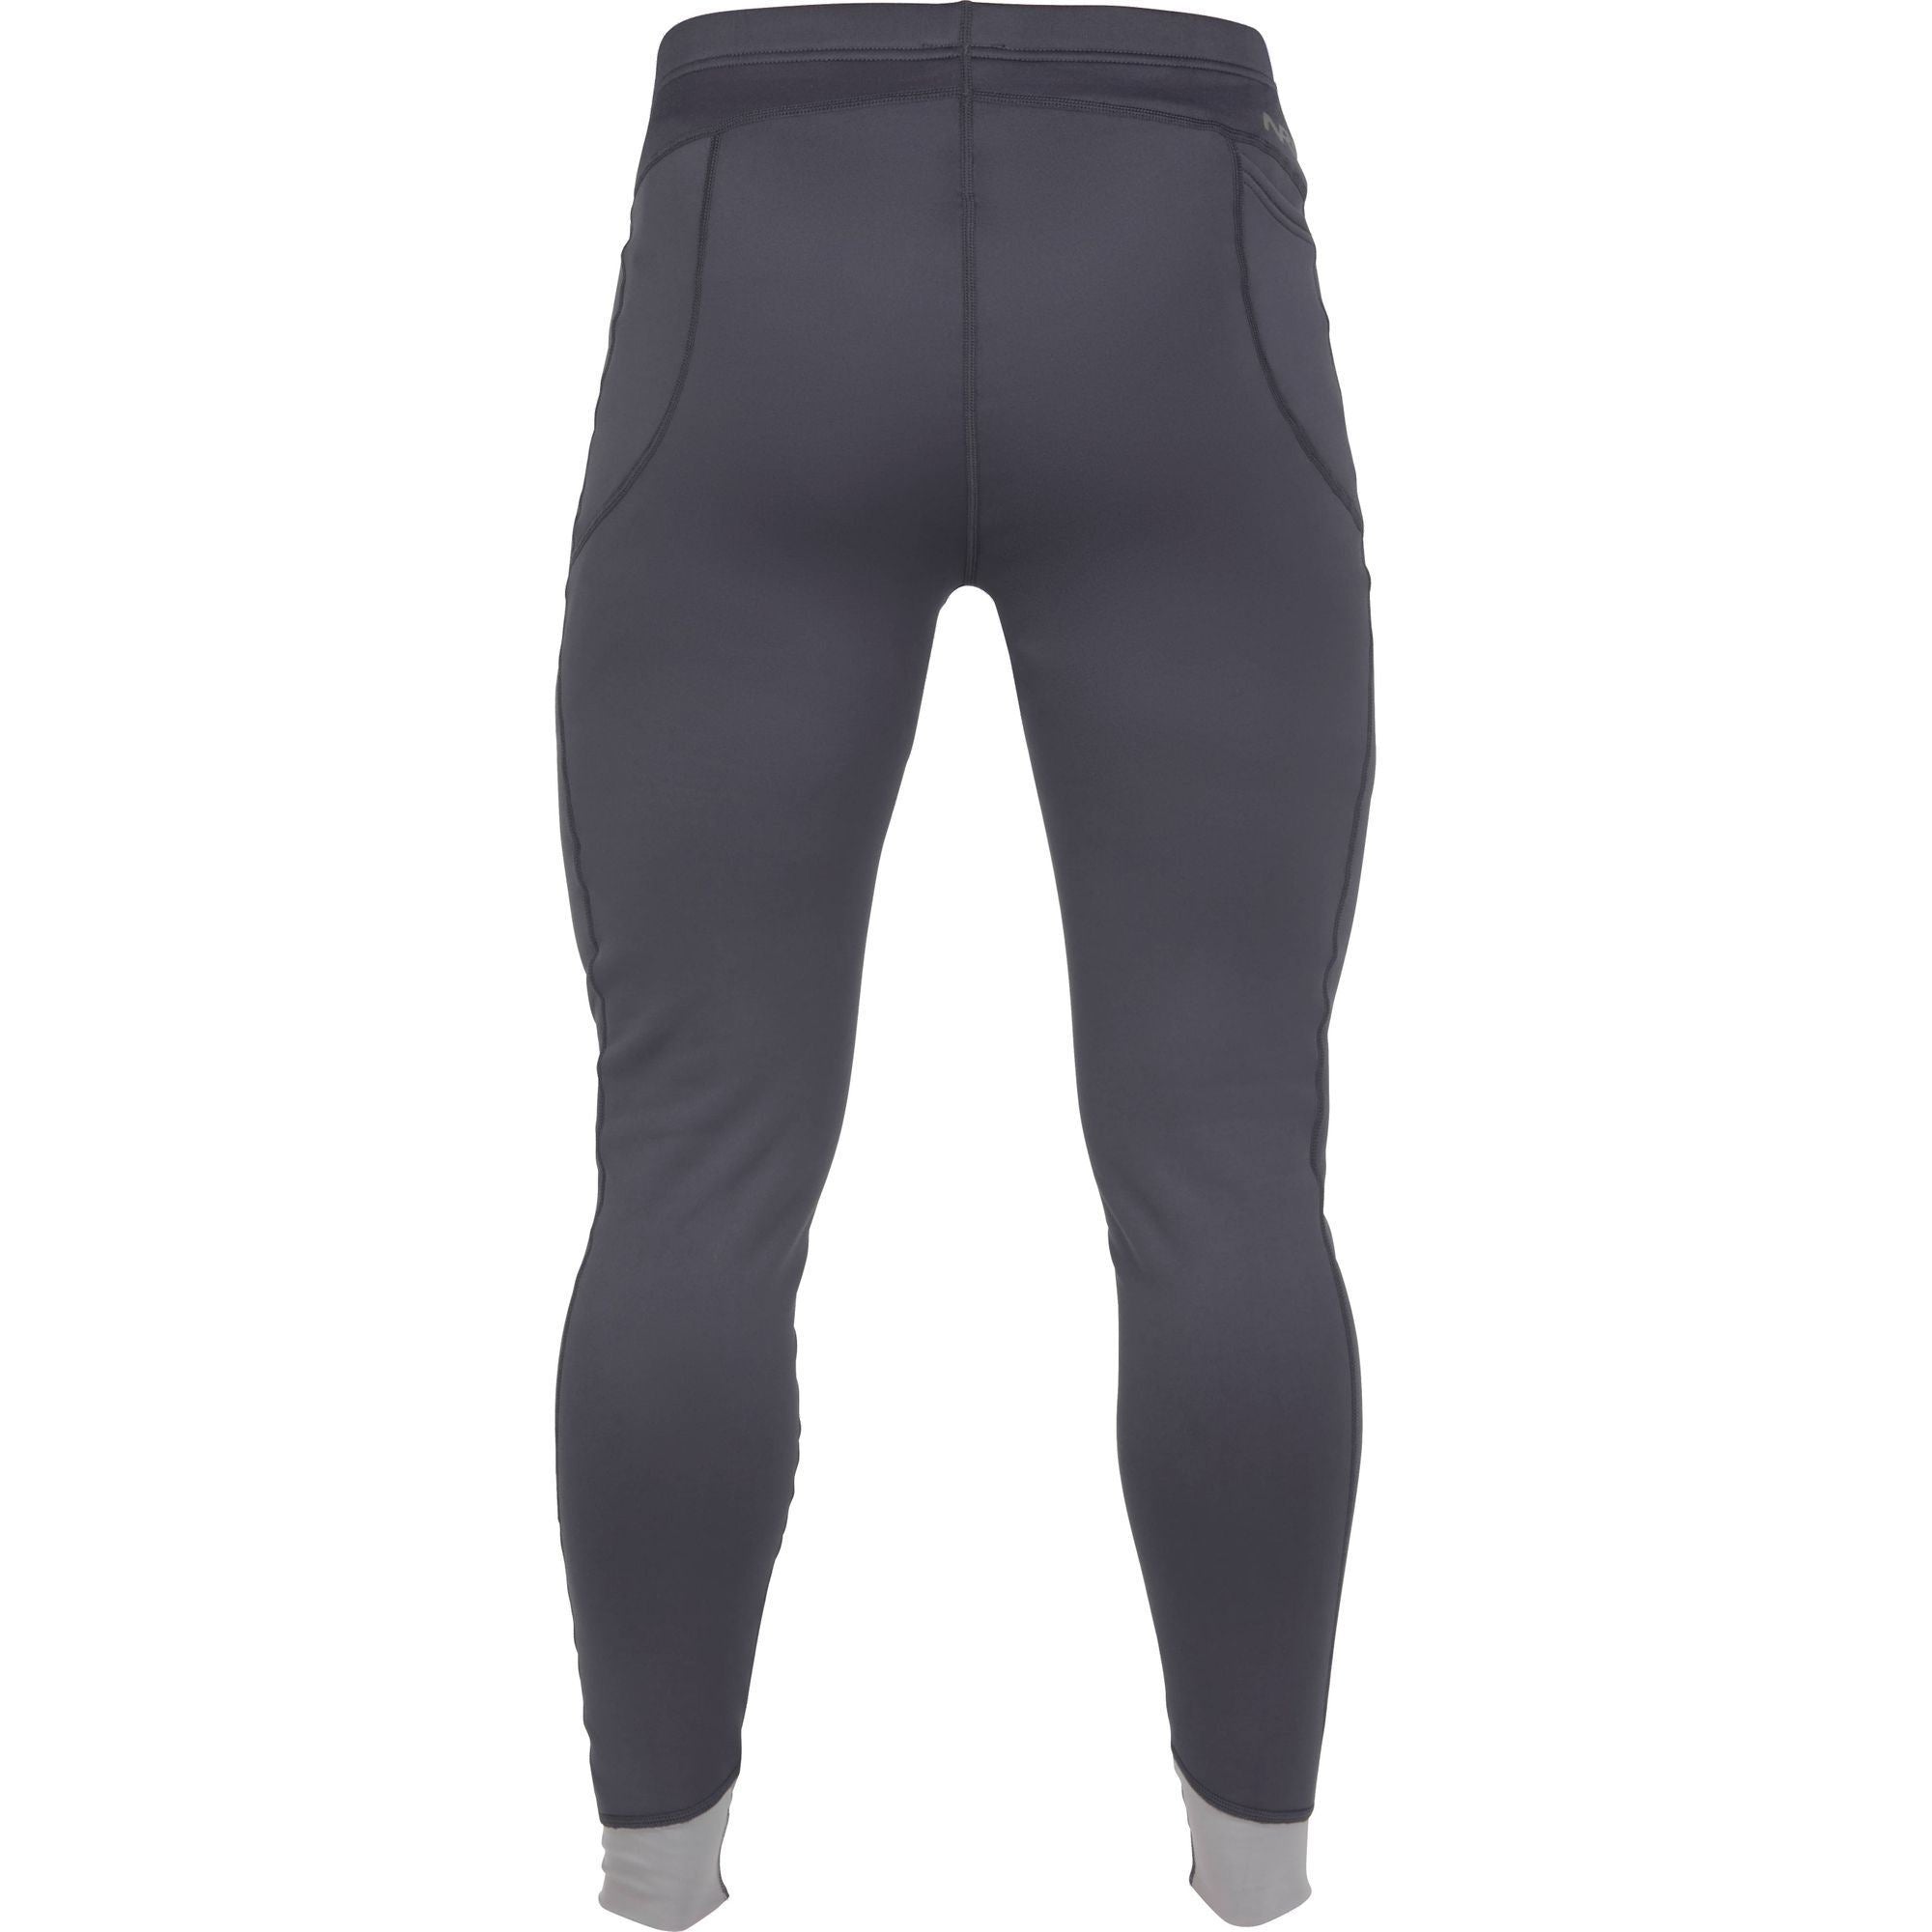 NRS Expedition Weight Union Pants, Men's